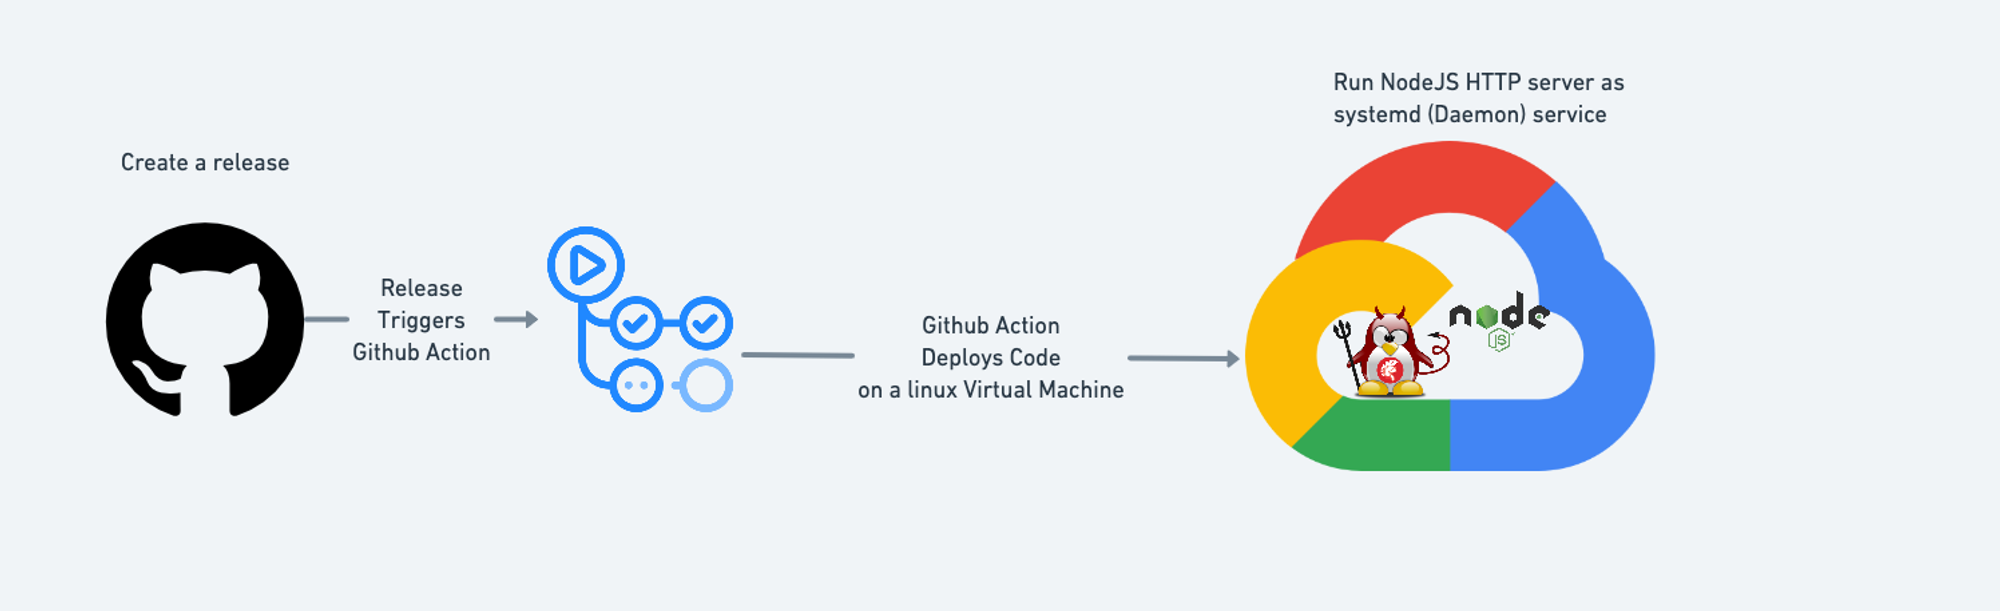 Run HTTP Server as systemd process and automate it with github actions